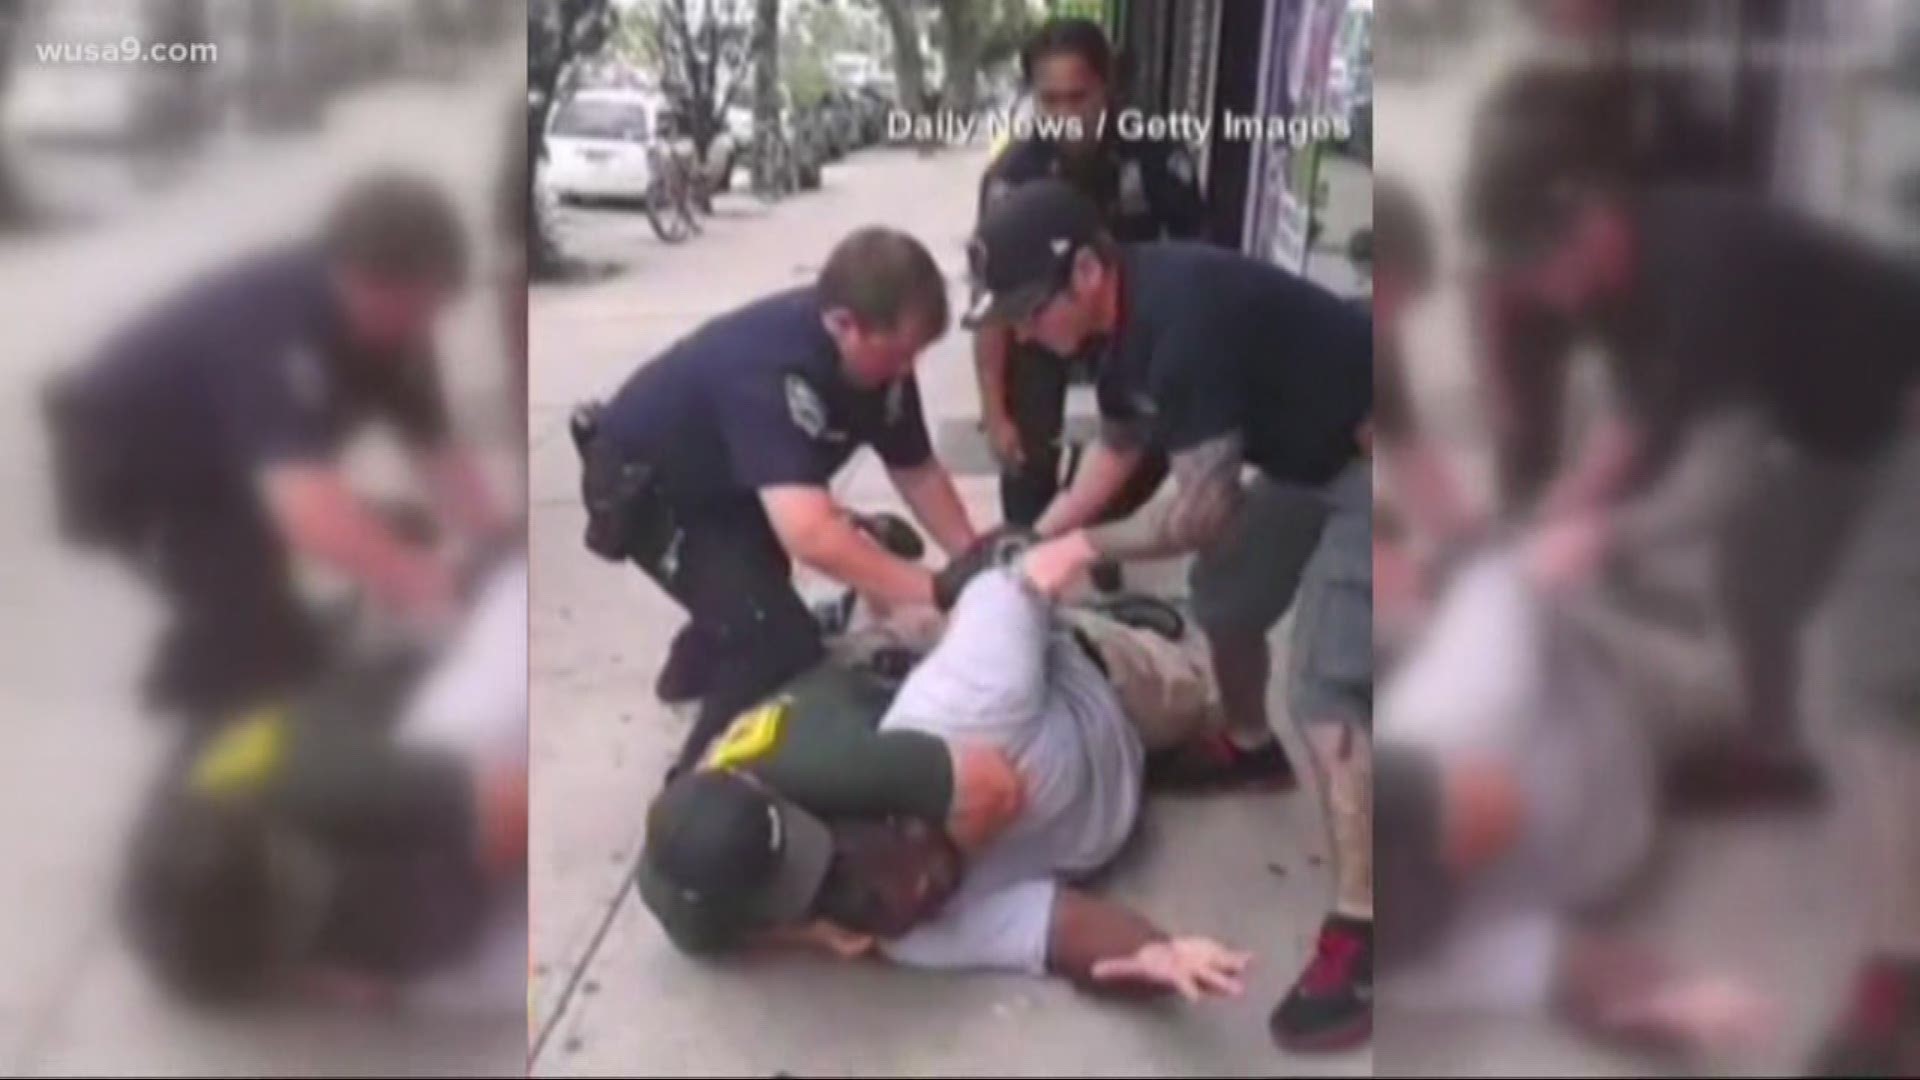 "I can't breathe." It's been five years since we heard Eric Garner say those final words. He said it 11 times. Garner's death was ruled a homicide by a medical examiner. Still, one day before the statute of limitations for the case expired, Attorney General Bill Barr, America's top law enforcement officer, made the decision to not prosecute Officer Daniel Pantaleo in his death.